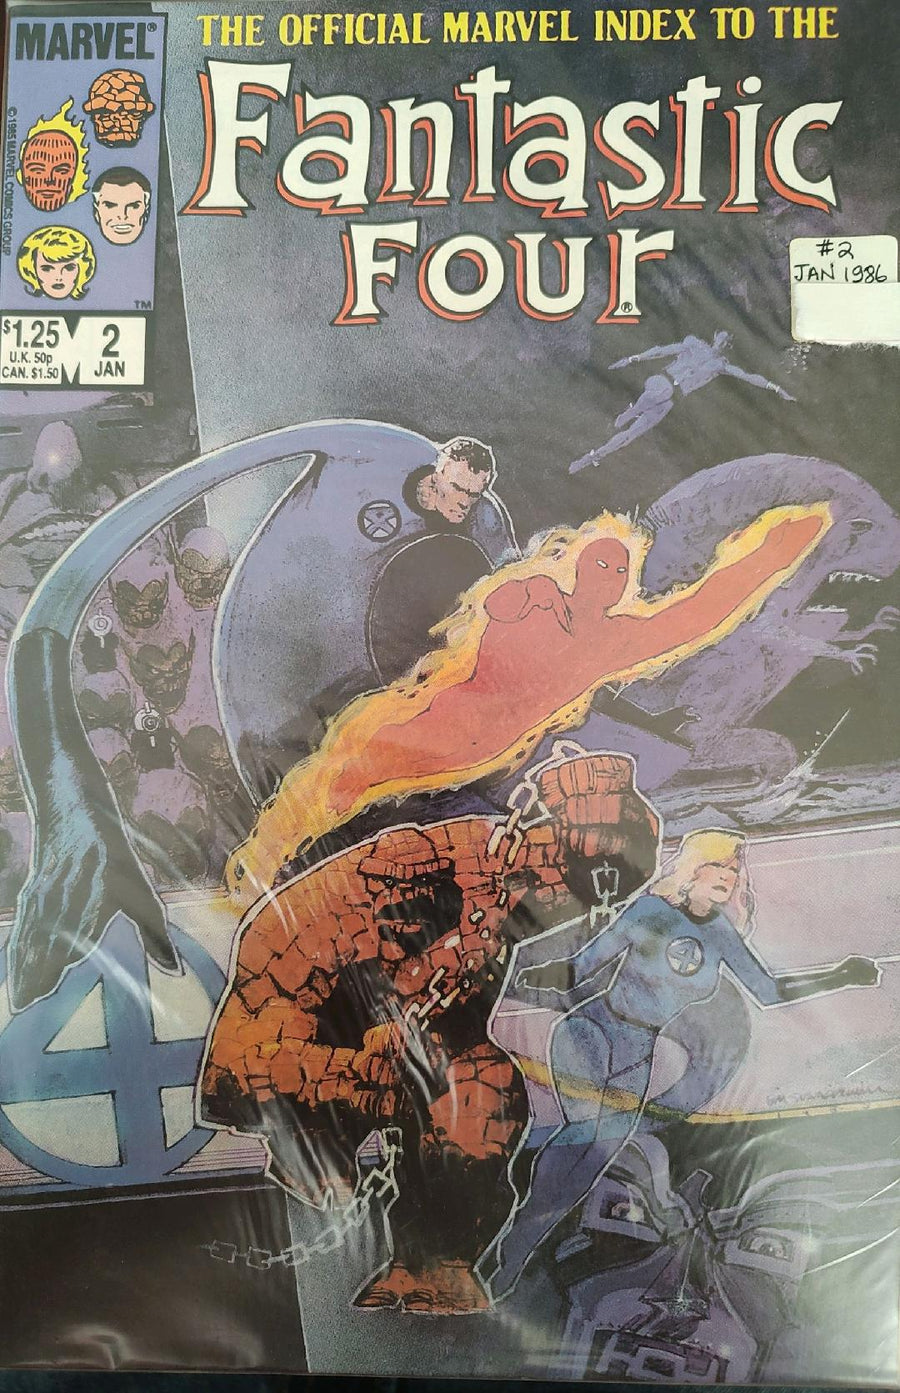 The Official Marvel Index to the Fantastic Four #2 Comic Book Cover